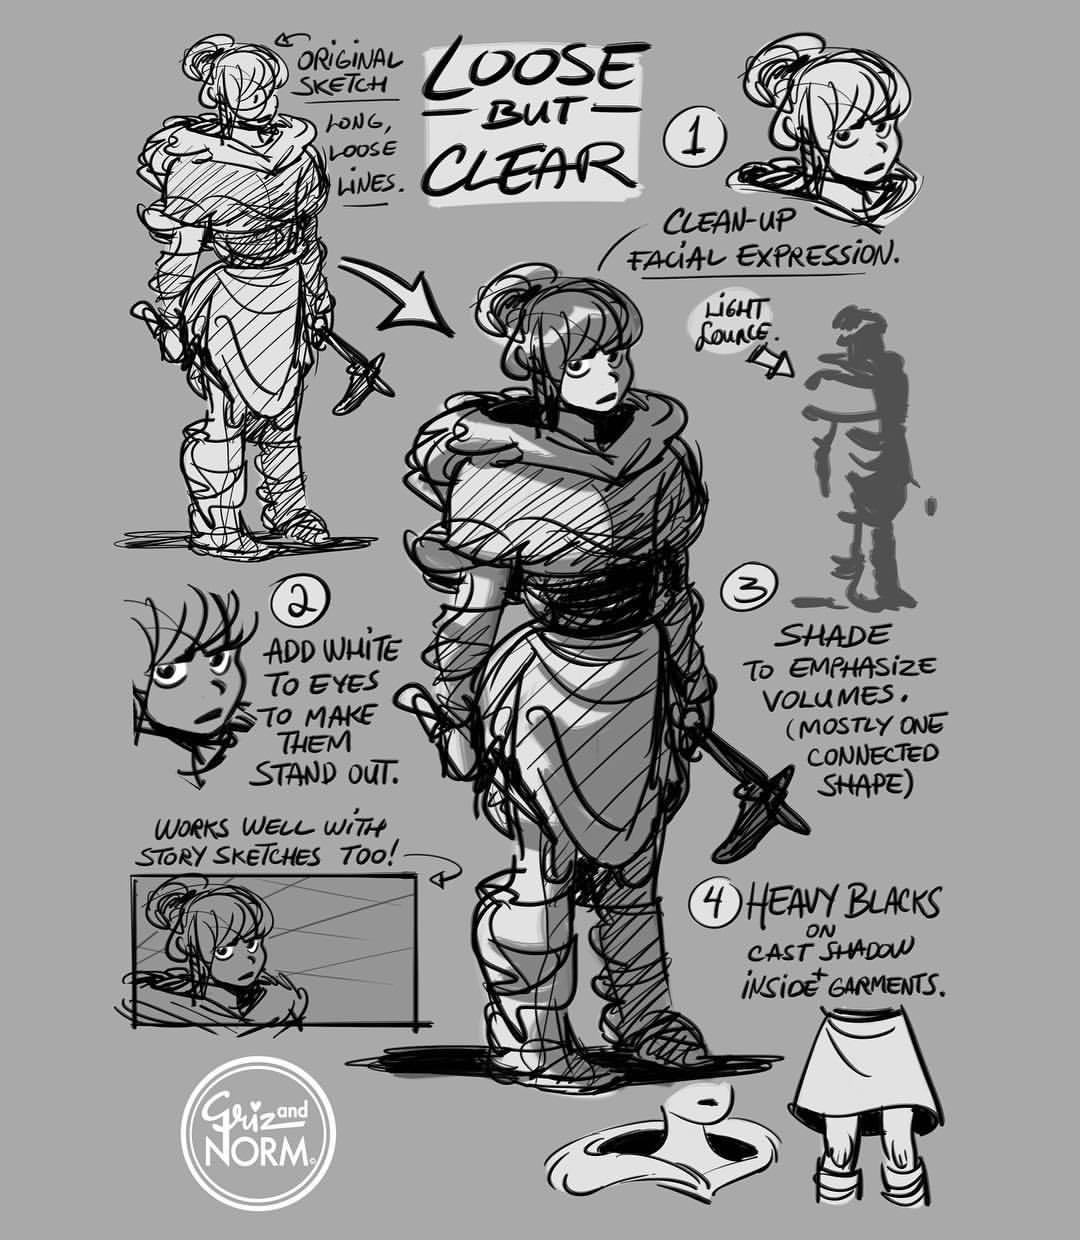 TuesdayTips - “Loose but Clear” Keeping a sketch loose and fun while making it clearer. -norm #grizandnorm #loosebutclear #keepitalive #tuesdaytips #100tuesdaytips